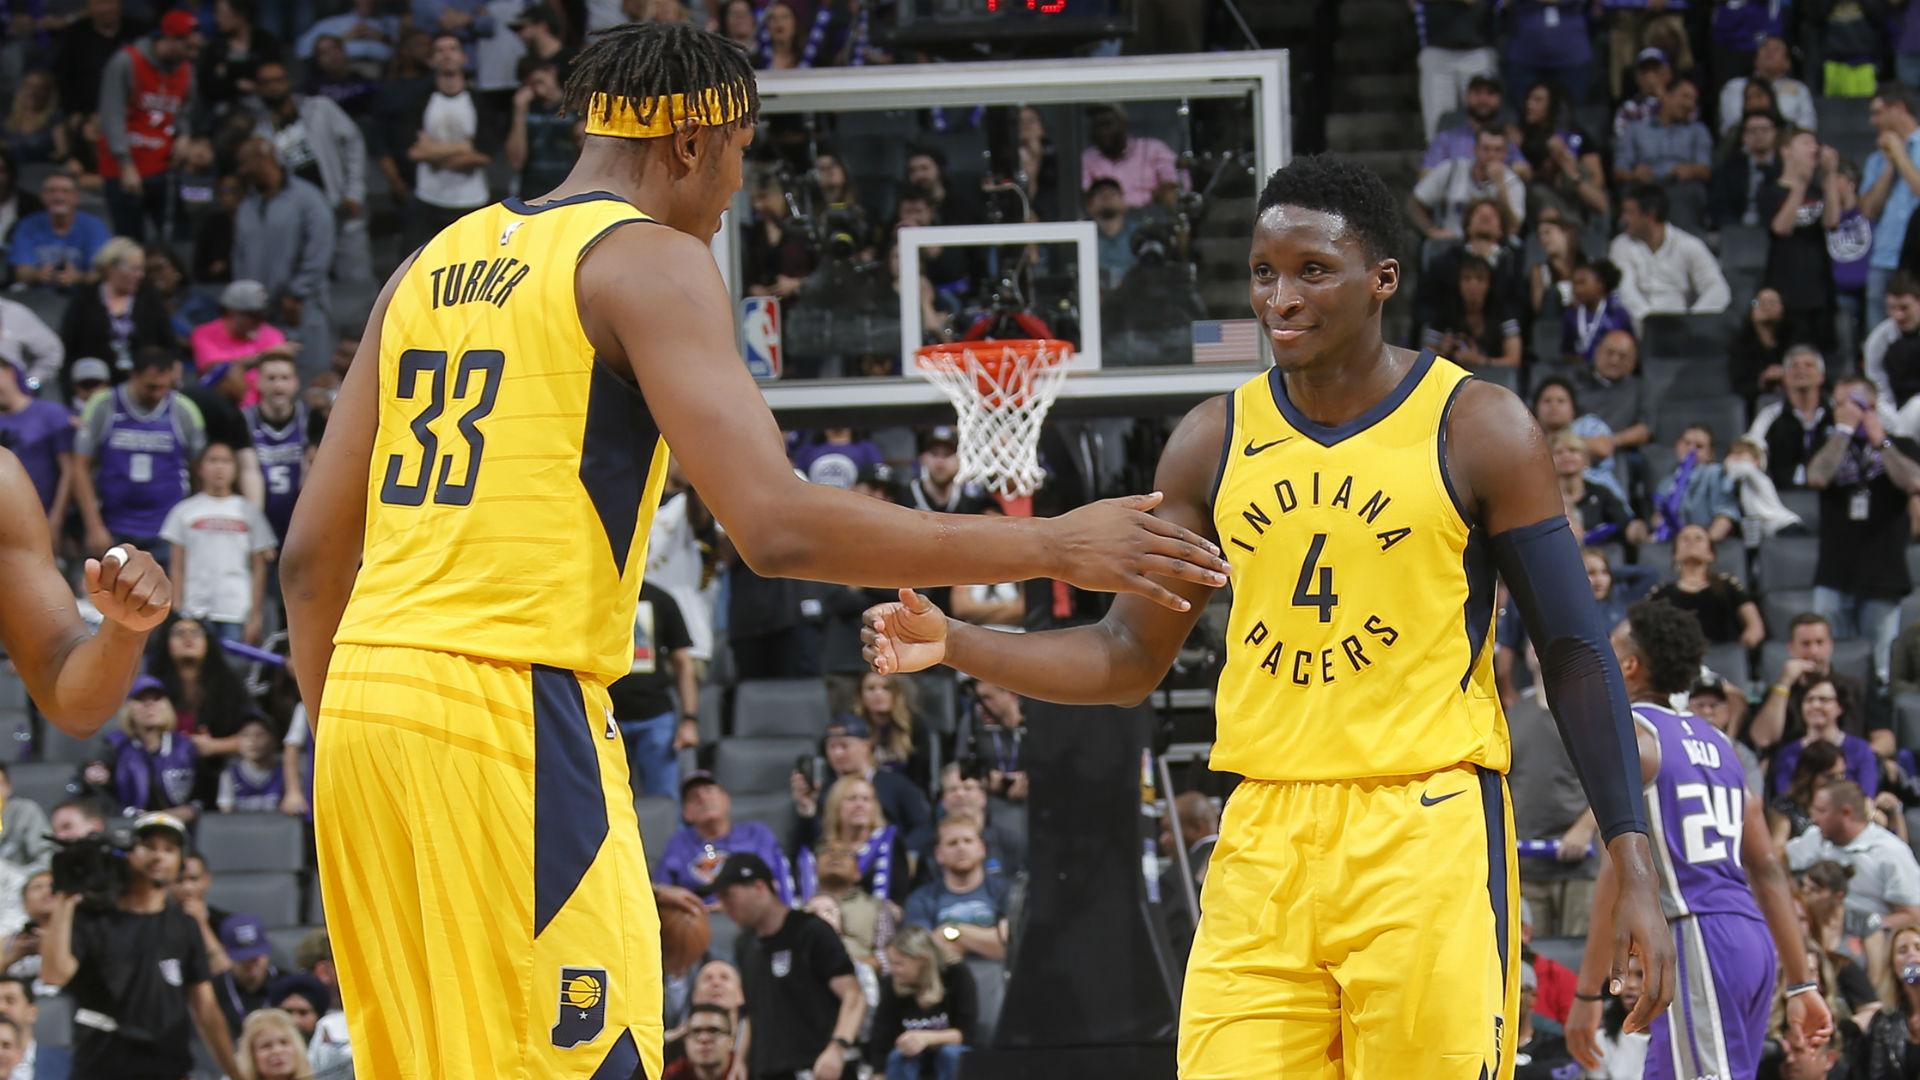 2018 19 NBA Season Preview: What To Expect From The Indiana Pacers